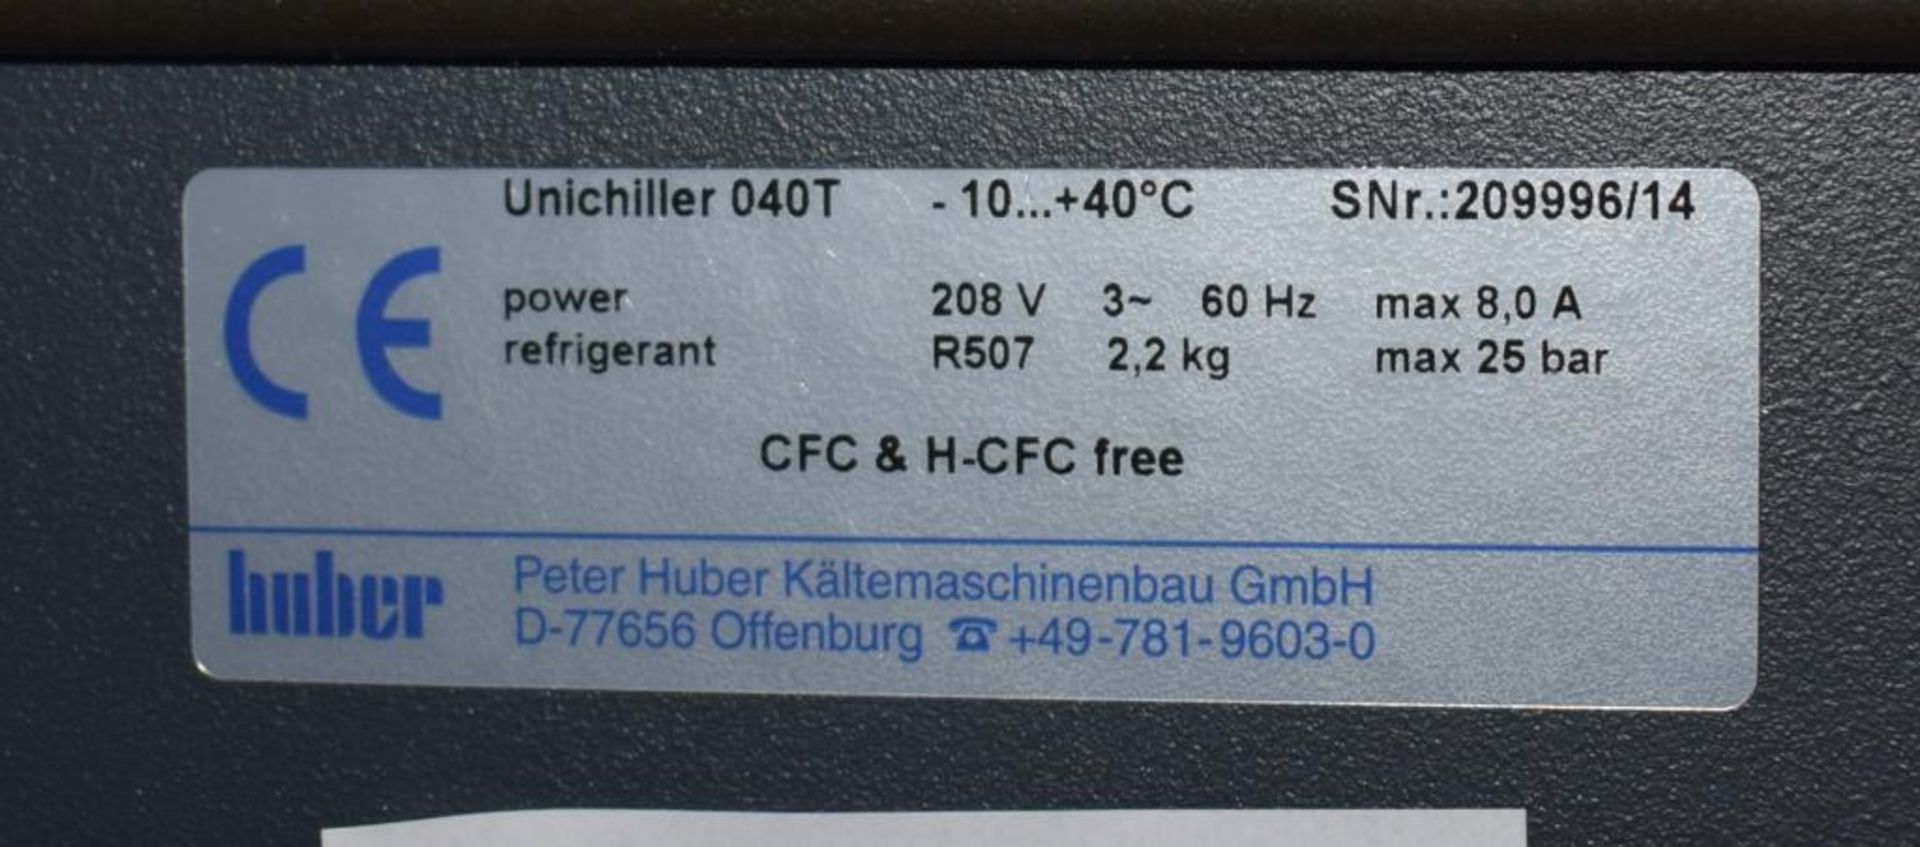 Huber Air Cooled Unichiller, Model 040T. Approximate operating temperature range -10 to +40 degrees - Image 7 of 7